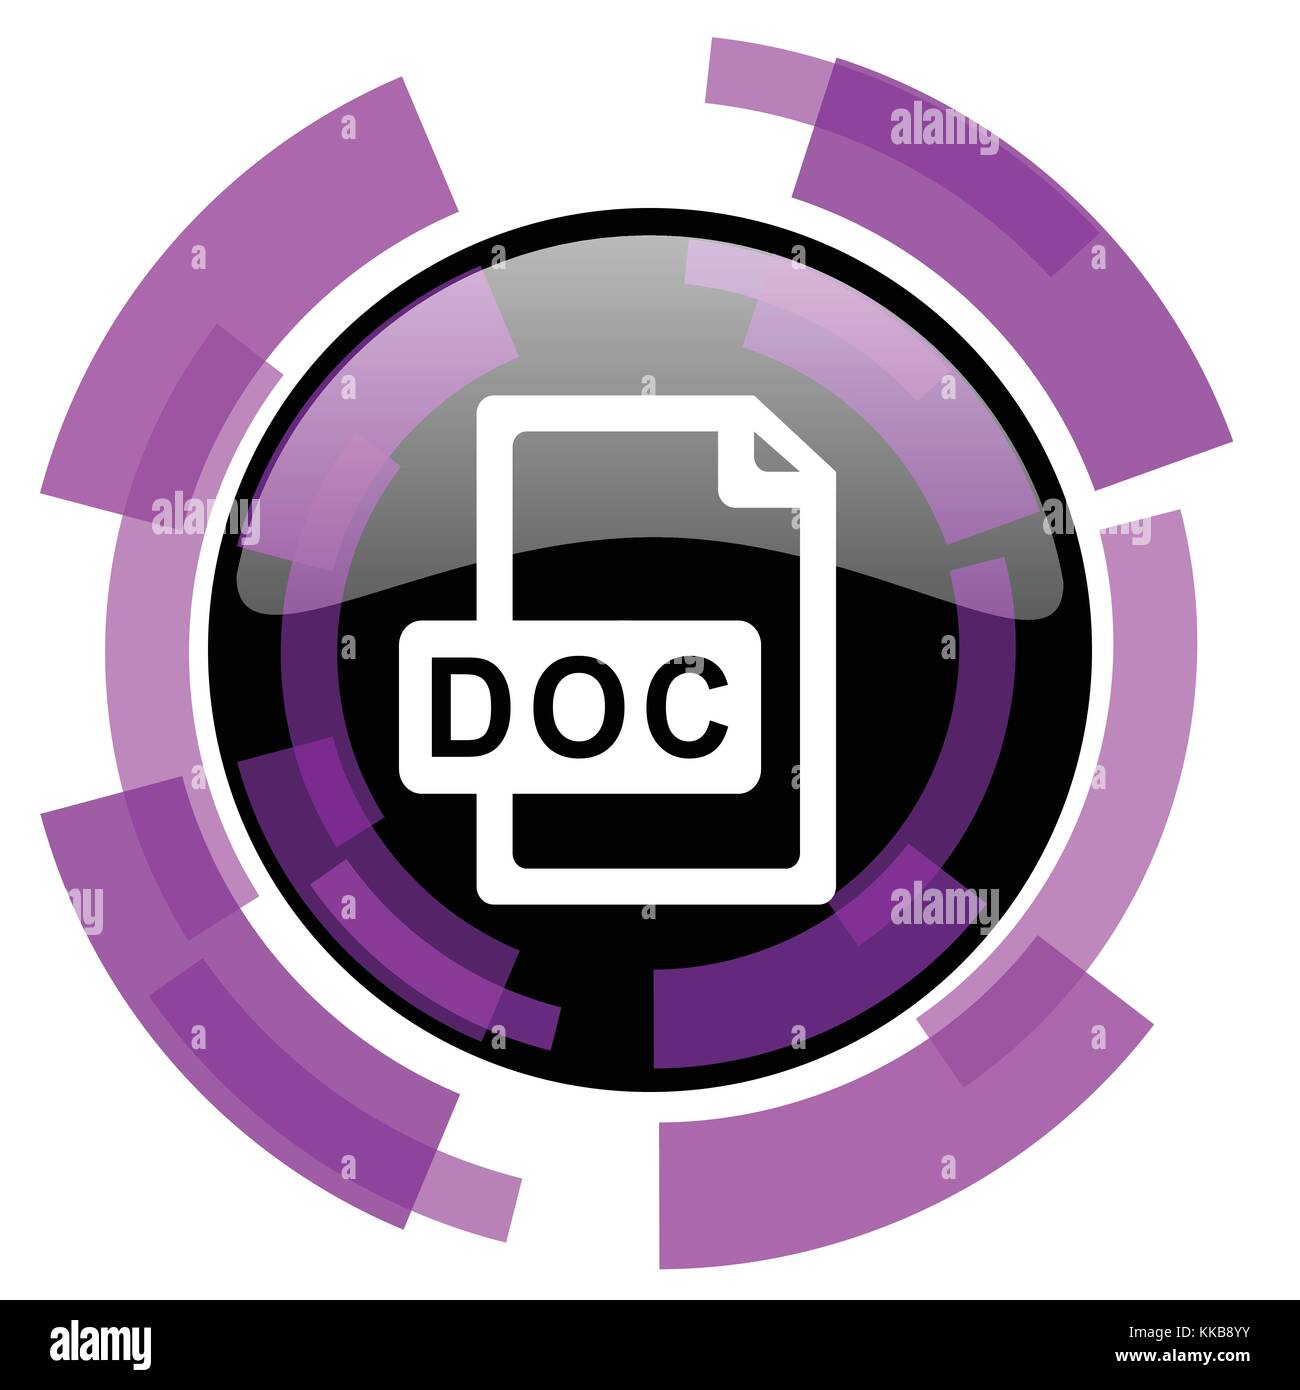 Doc file pink violet modern design vector web and smartphone icon. Round button in eps 10 isolated on white background. Stock Vector